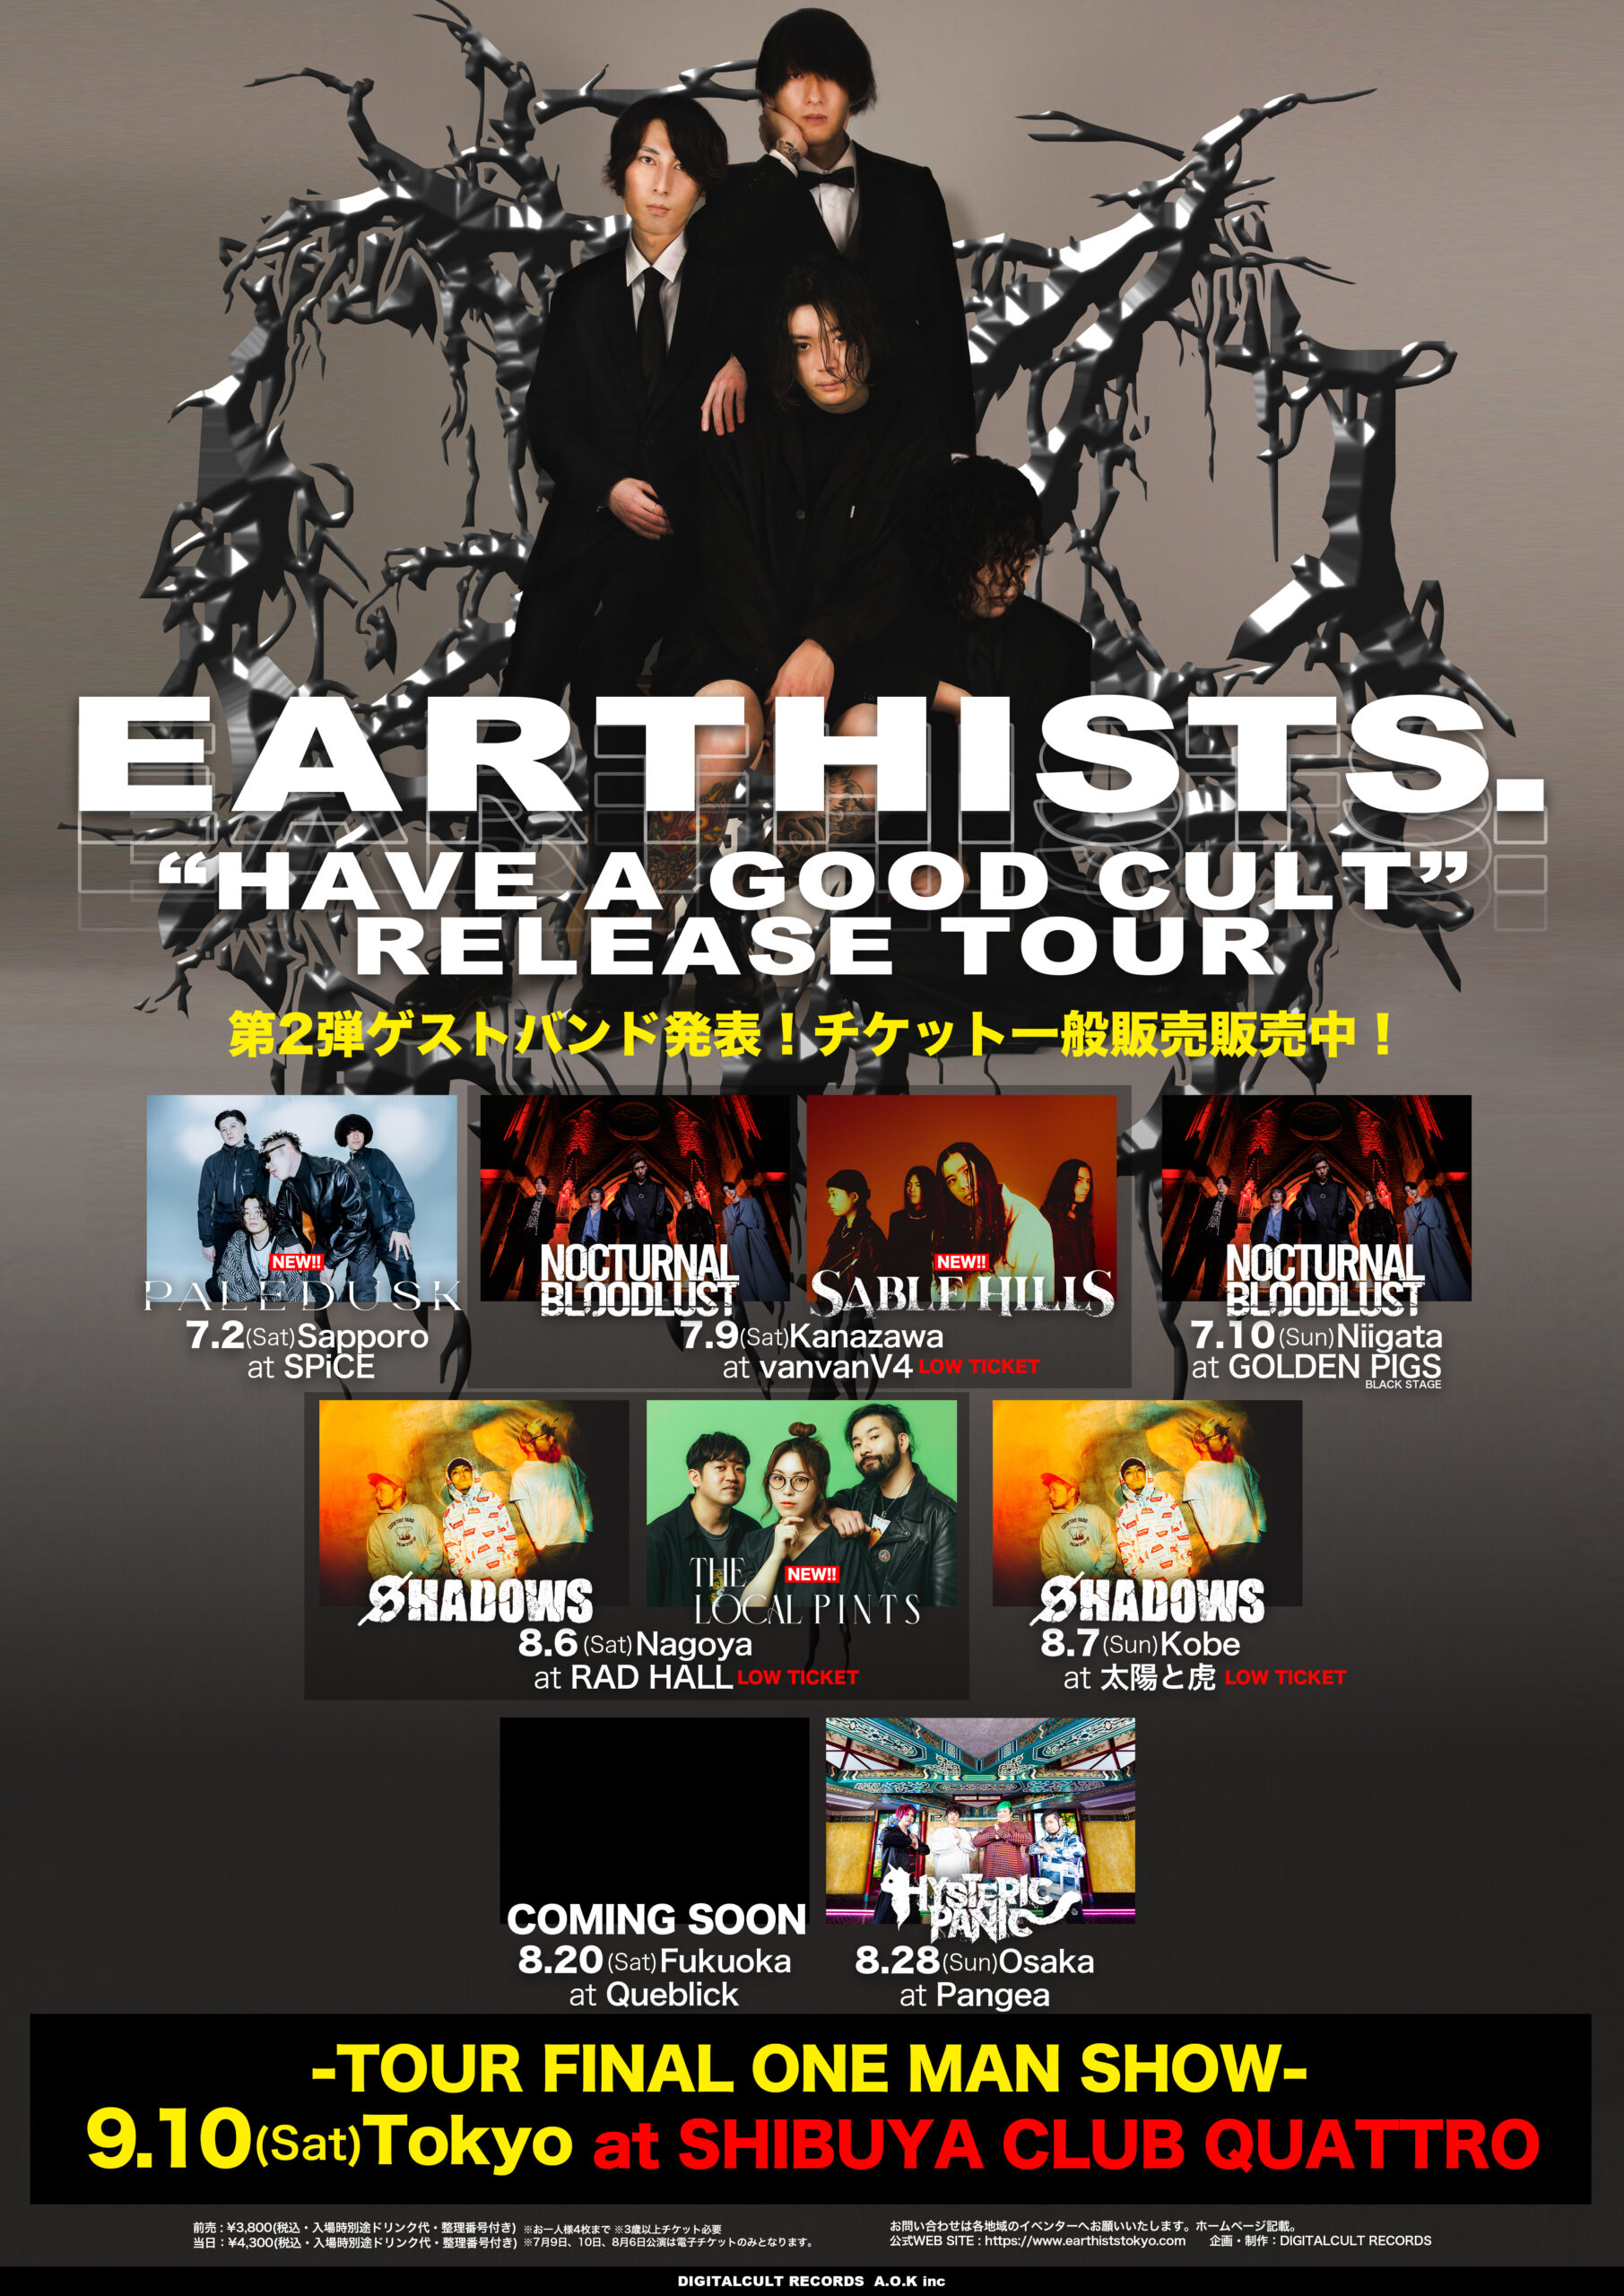 Earthists. pre. “Have a Good Cult” Release Tour 出演決定！